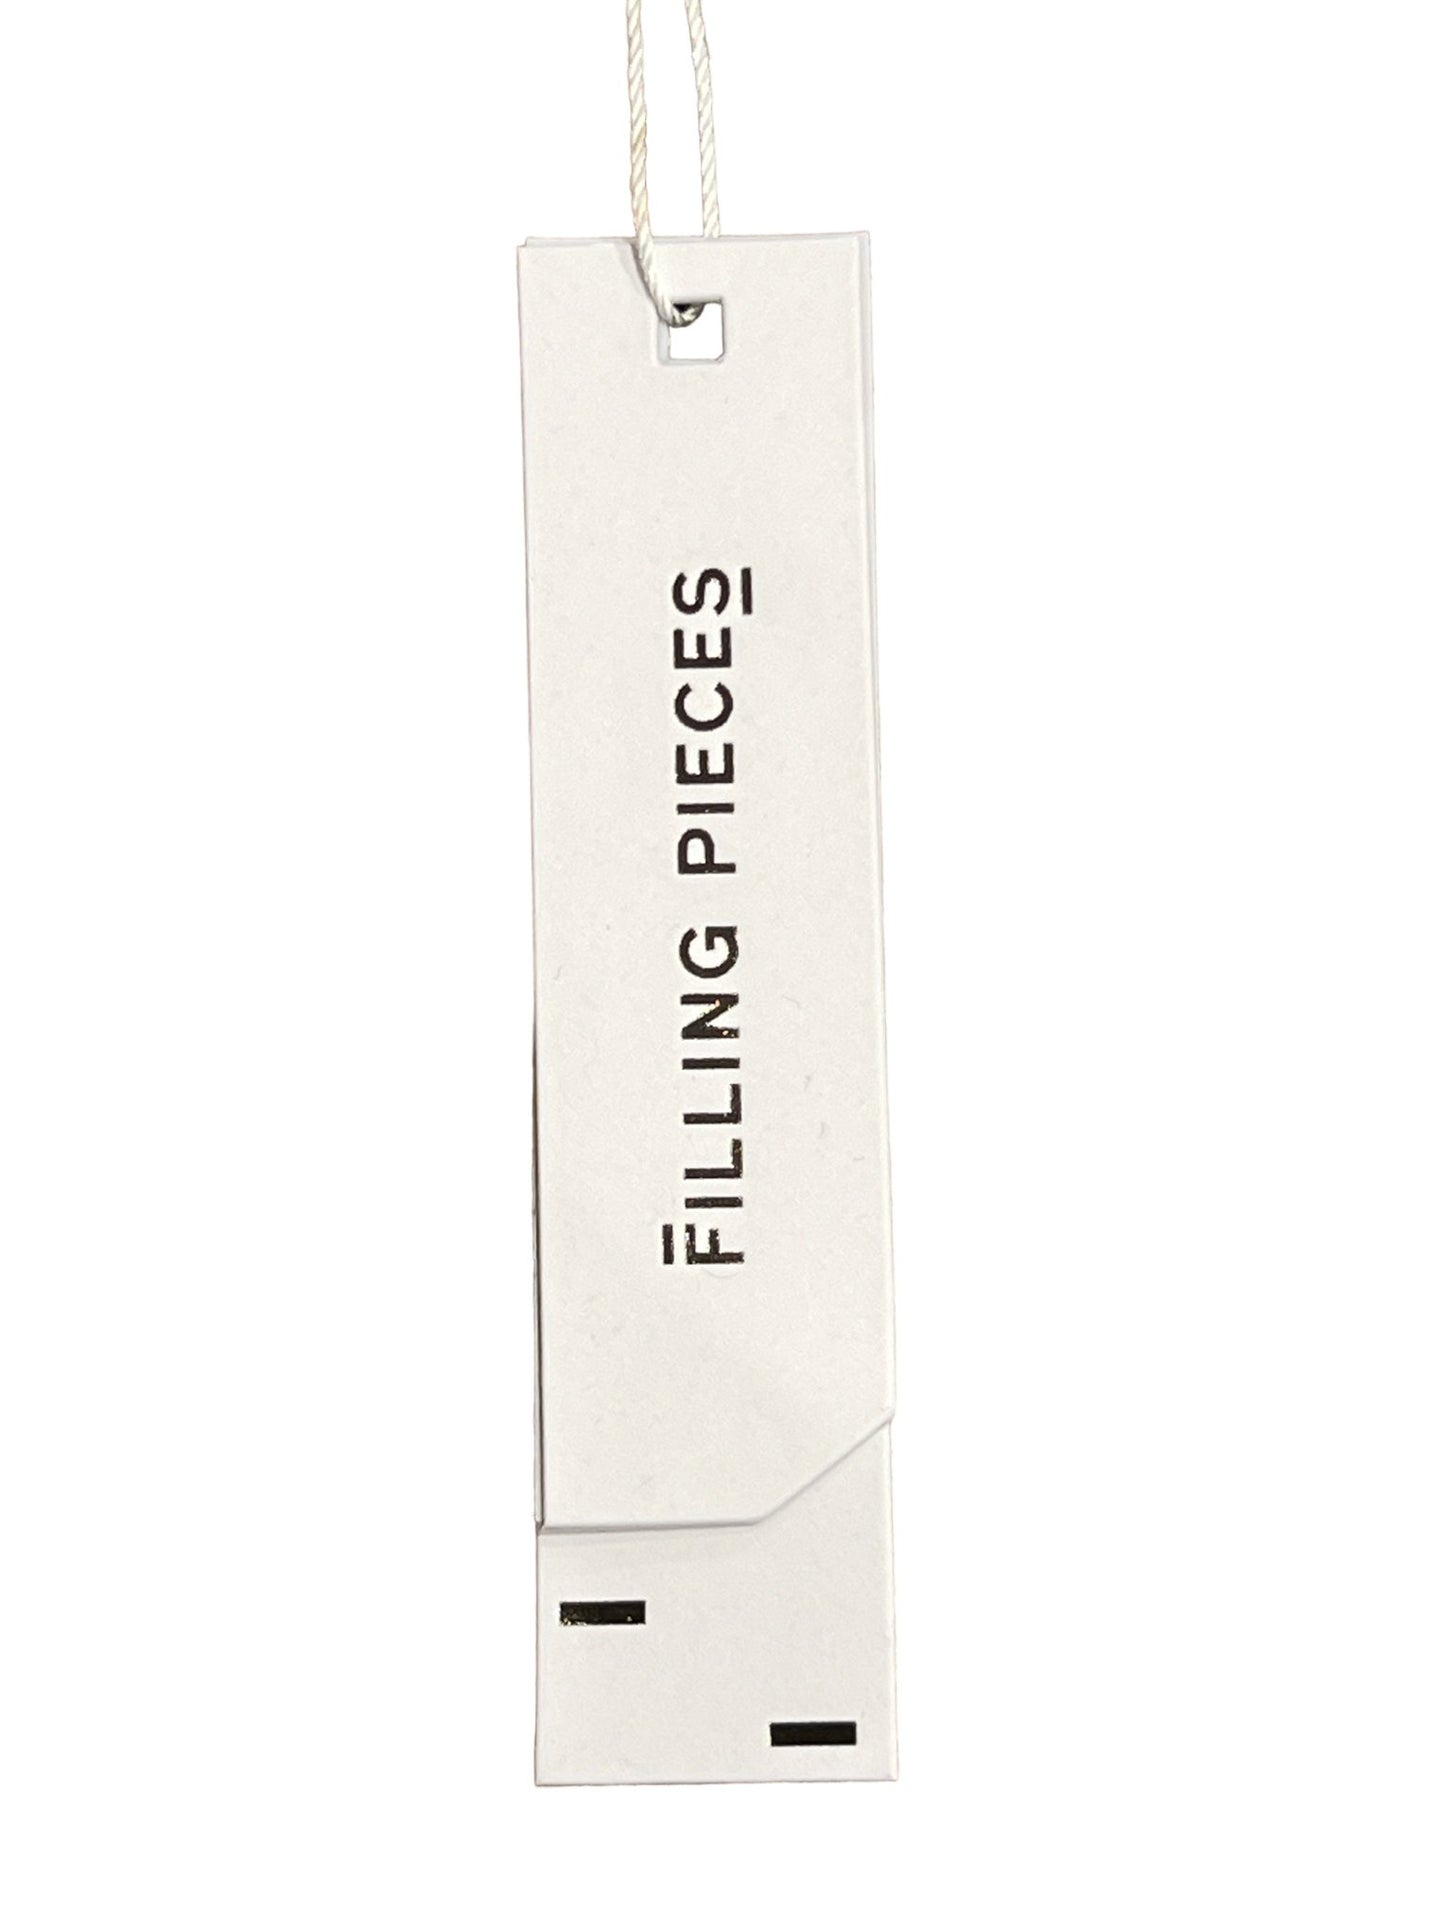 Clothing tag with text "FILLING PIECES RESORT MONOGRAM SHIRT MILK" on an organic cotton short sleeve shirt against a white background by FILLING PIECES.